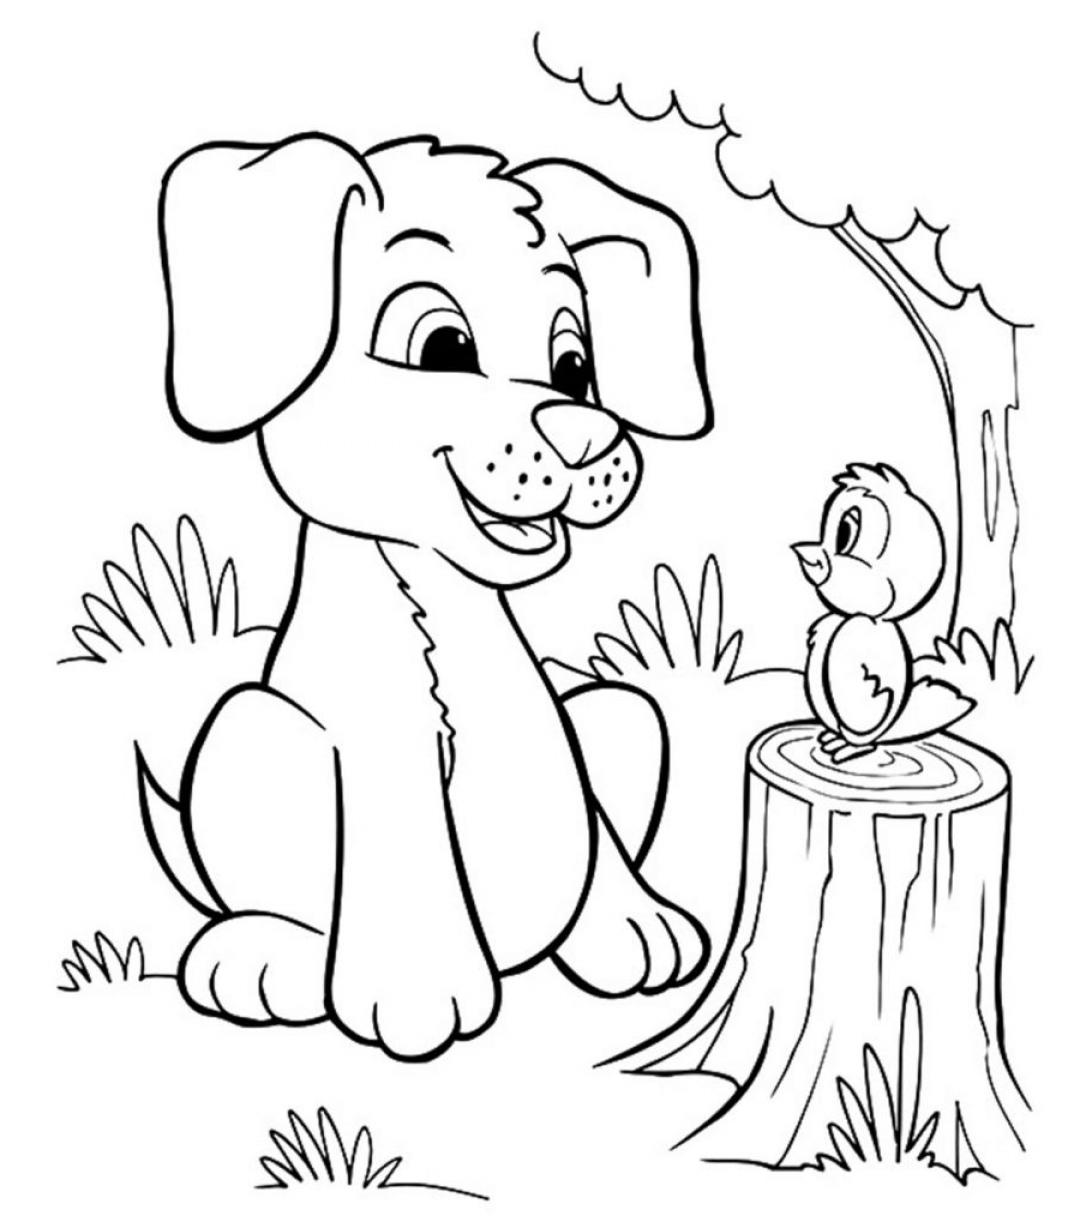 Free Printable Puppy Coloring Pages - SheetalColor.com